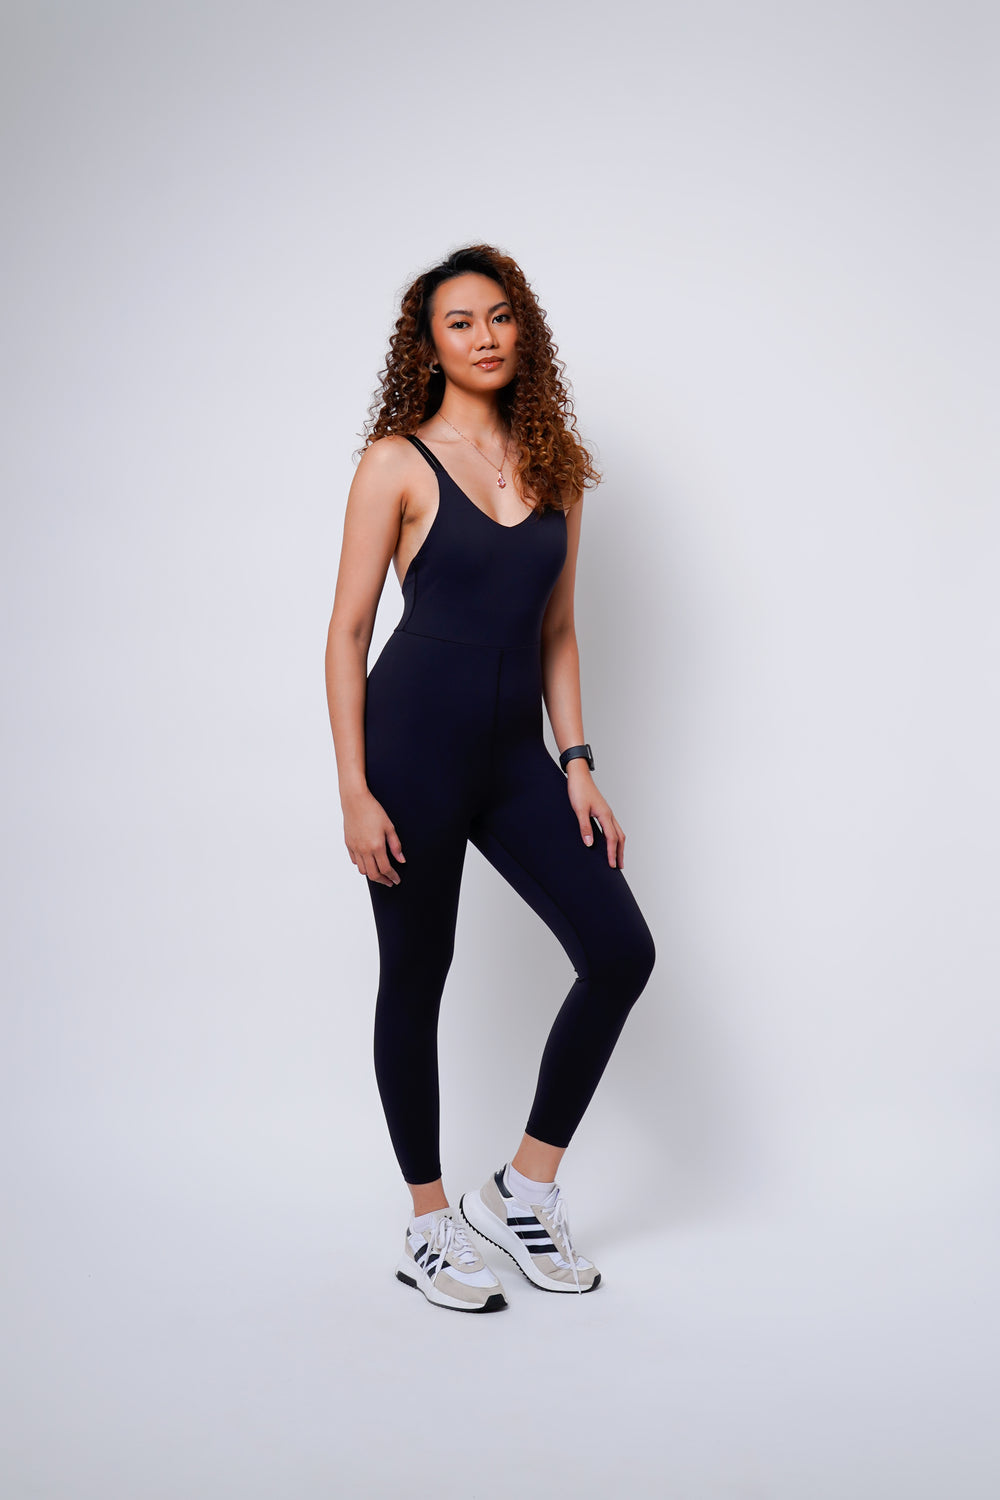 nud-active-sports-collection-onesie-black-athleisure-002